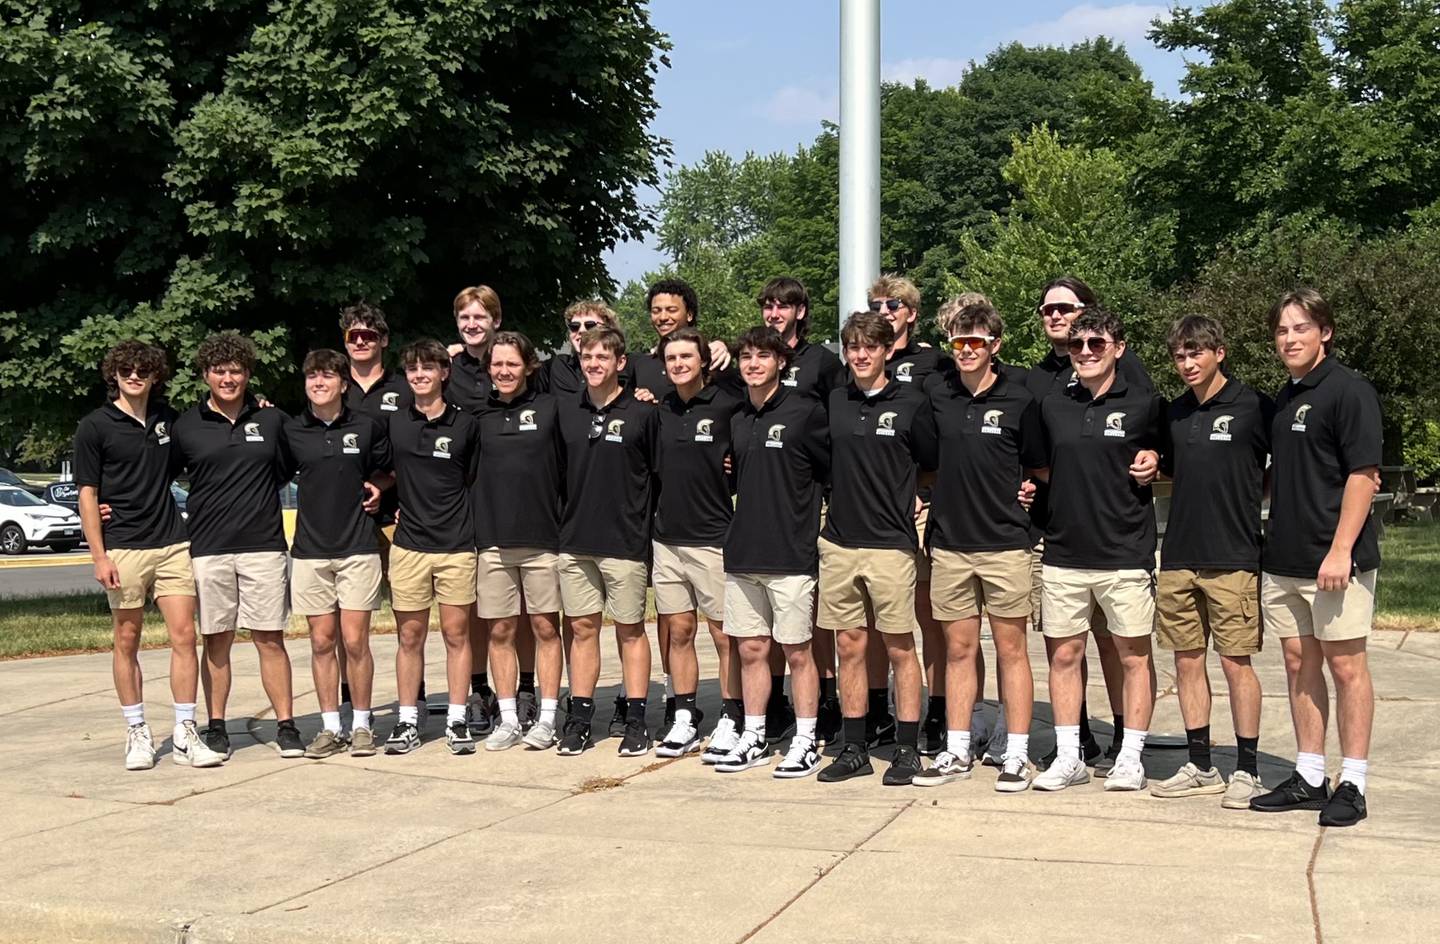 The Sycamore baseball team poses before leaving for the Class 3A State Tournament on June 8, 2023.